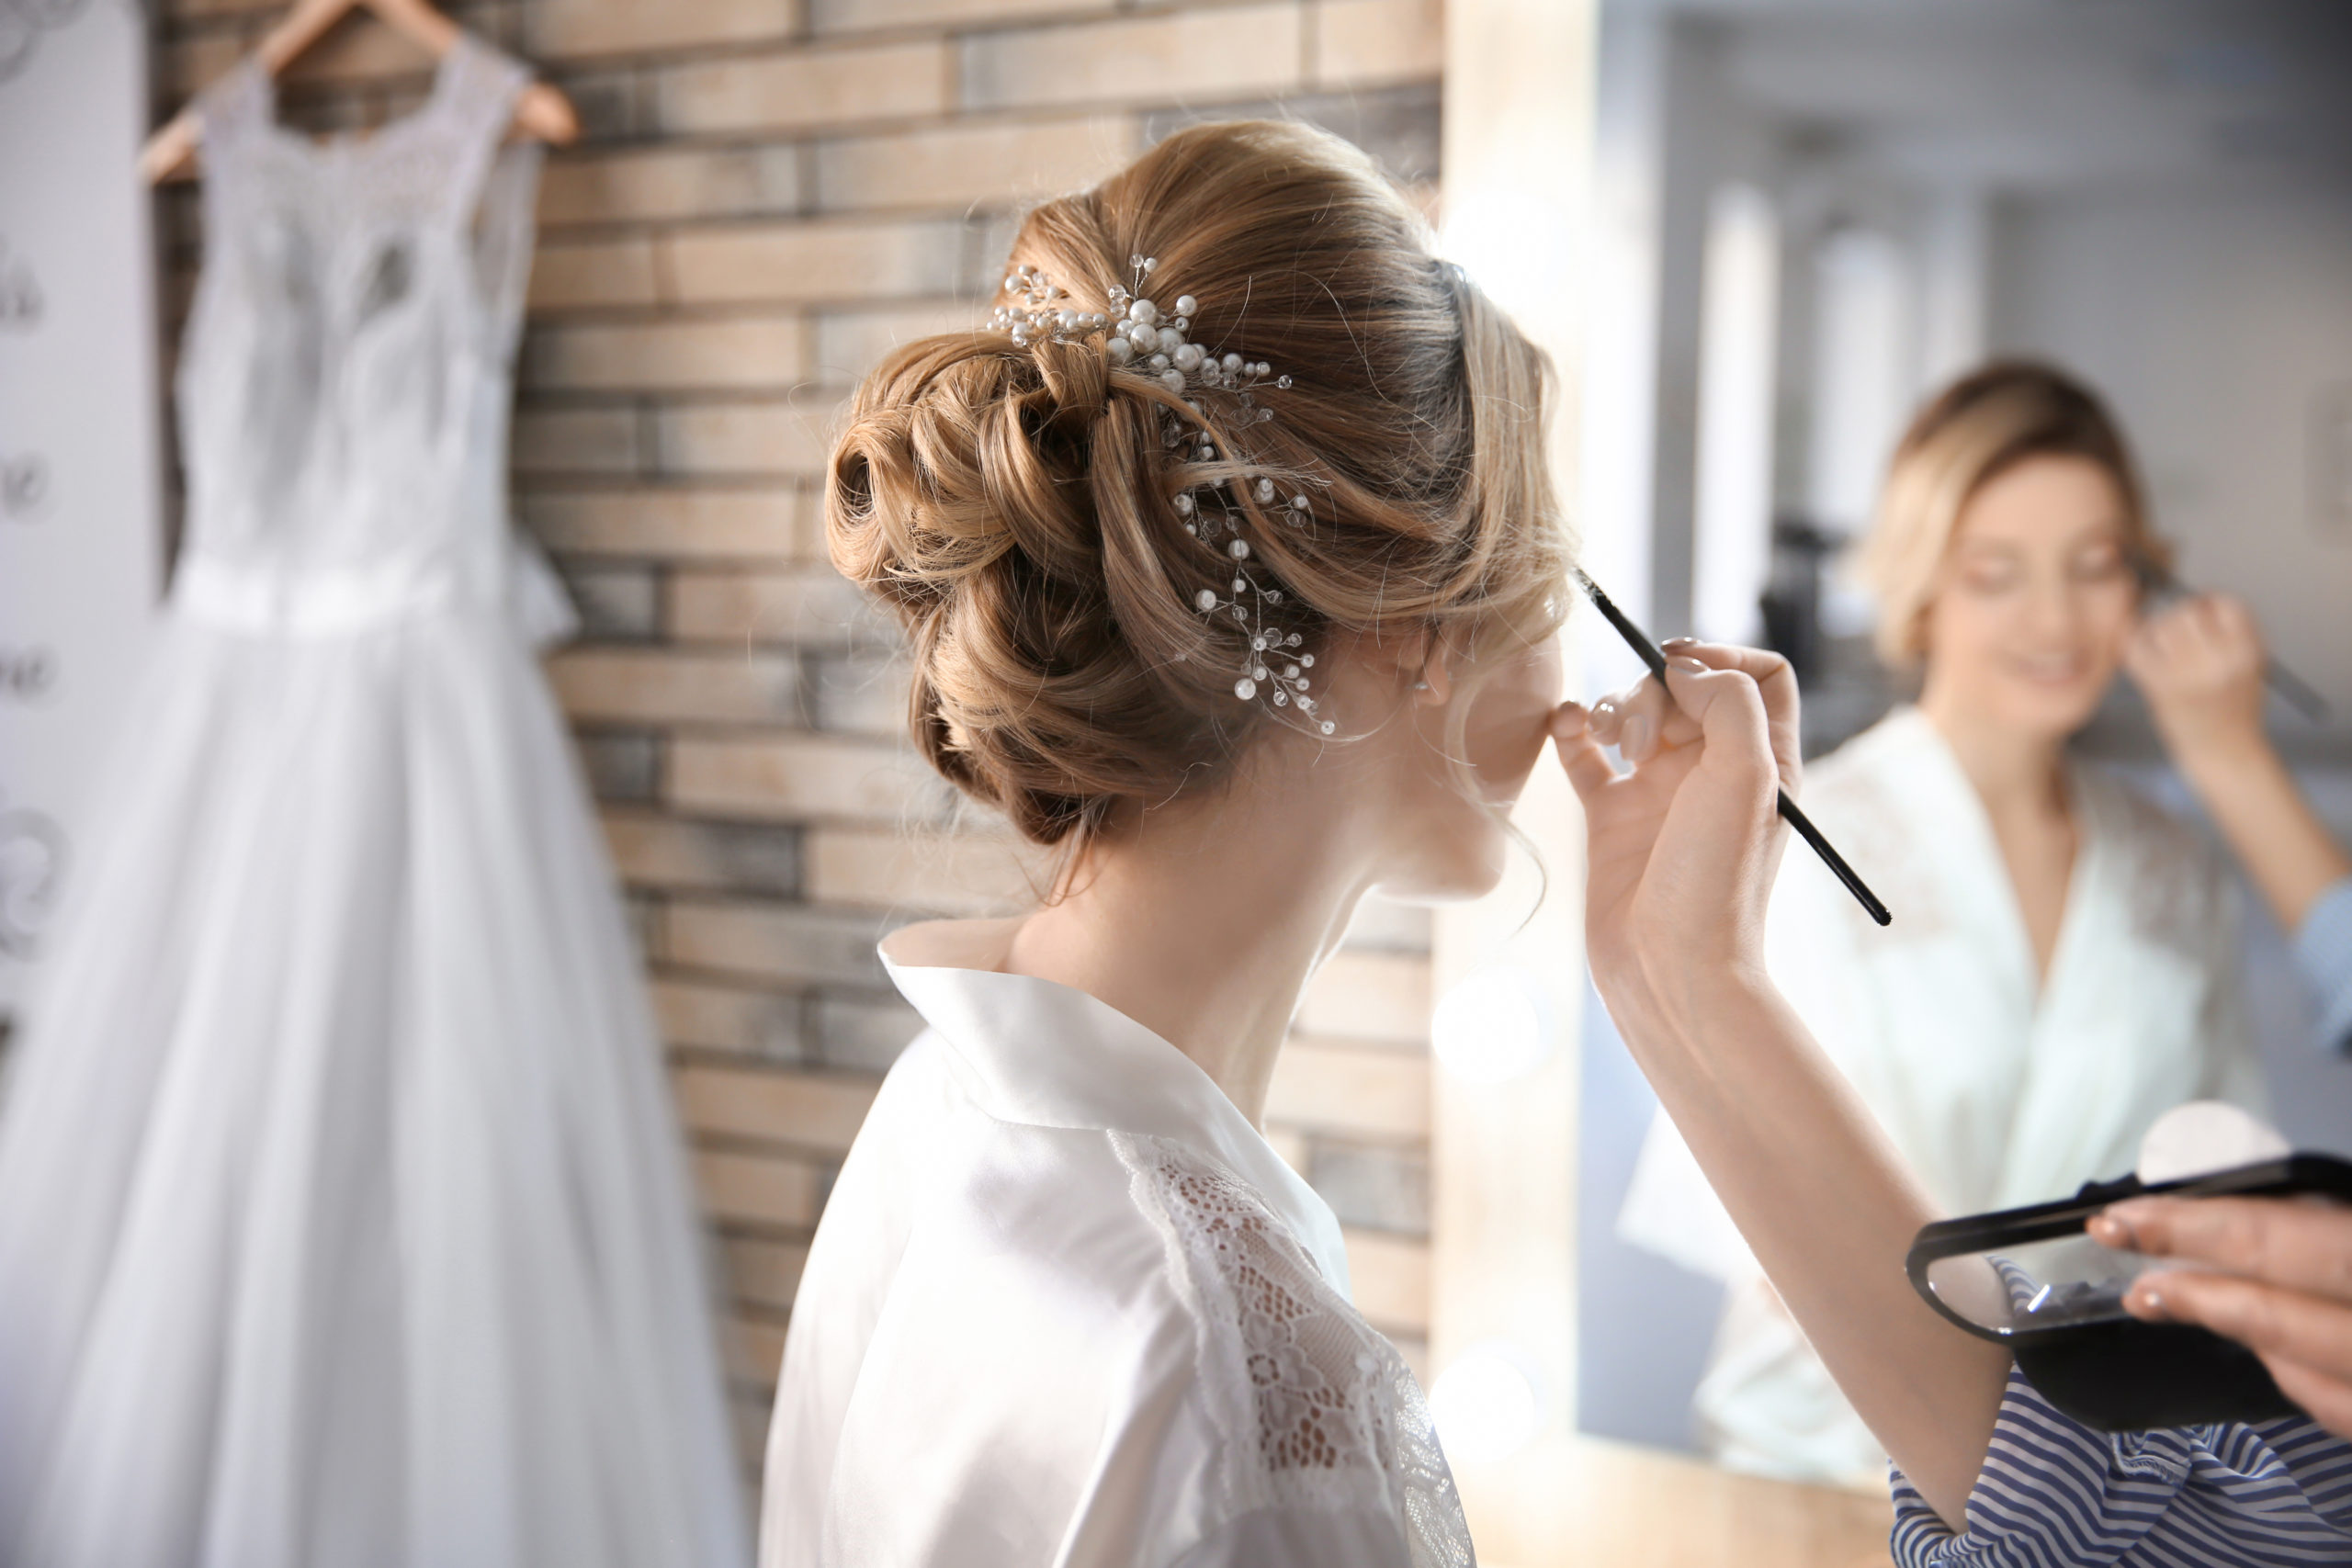 A makeup artist works on a bride's makeup before a wedding. Her inland marine insurance can protect her tools as she works from location to location.